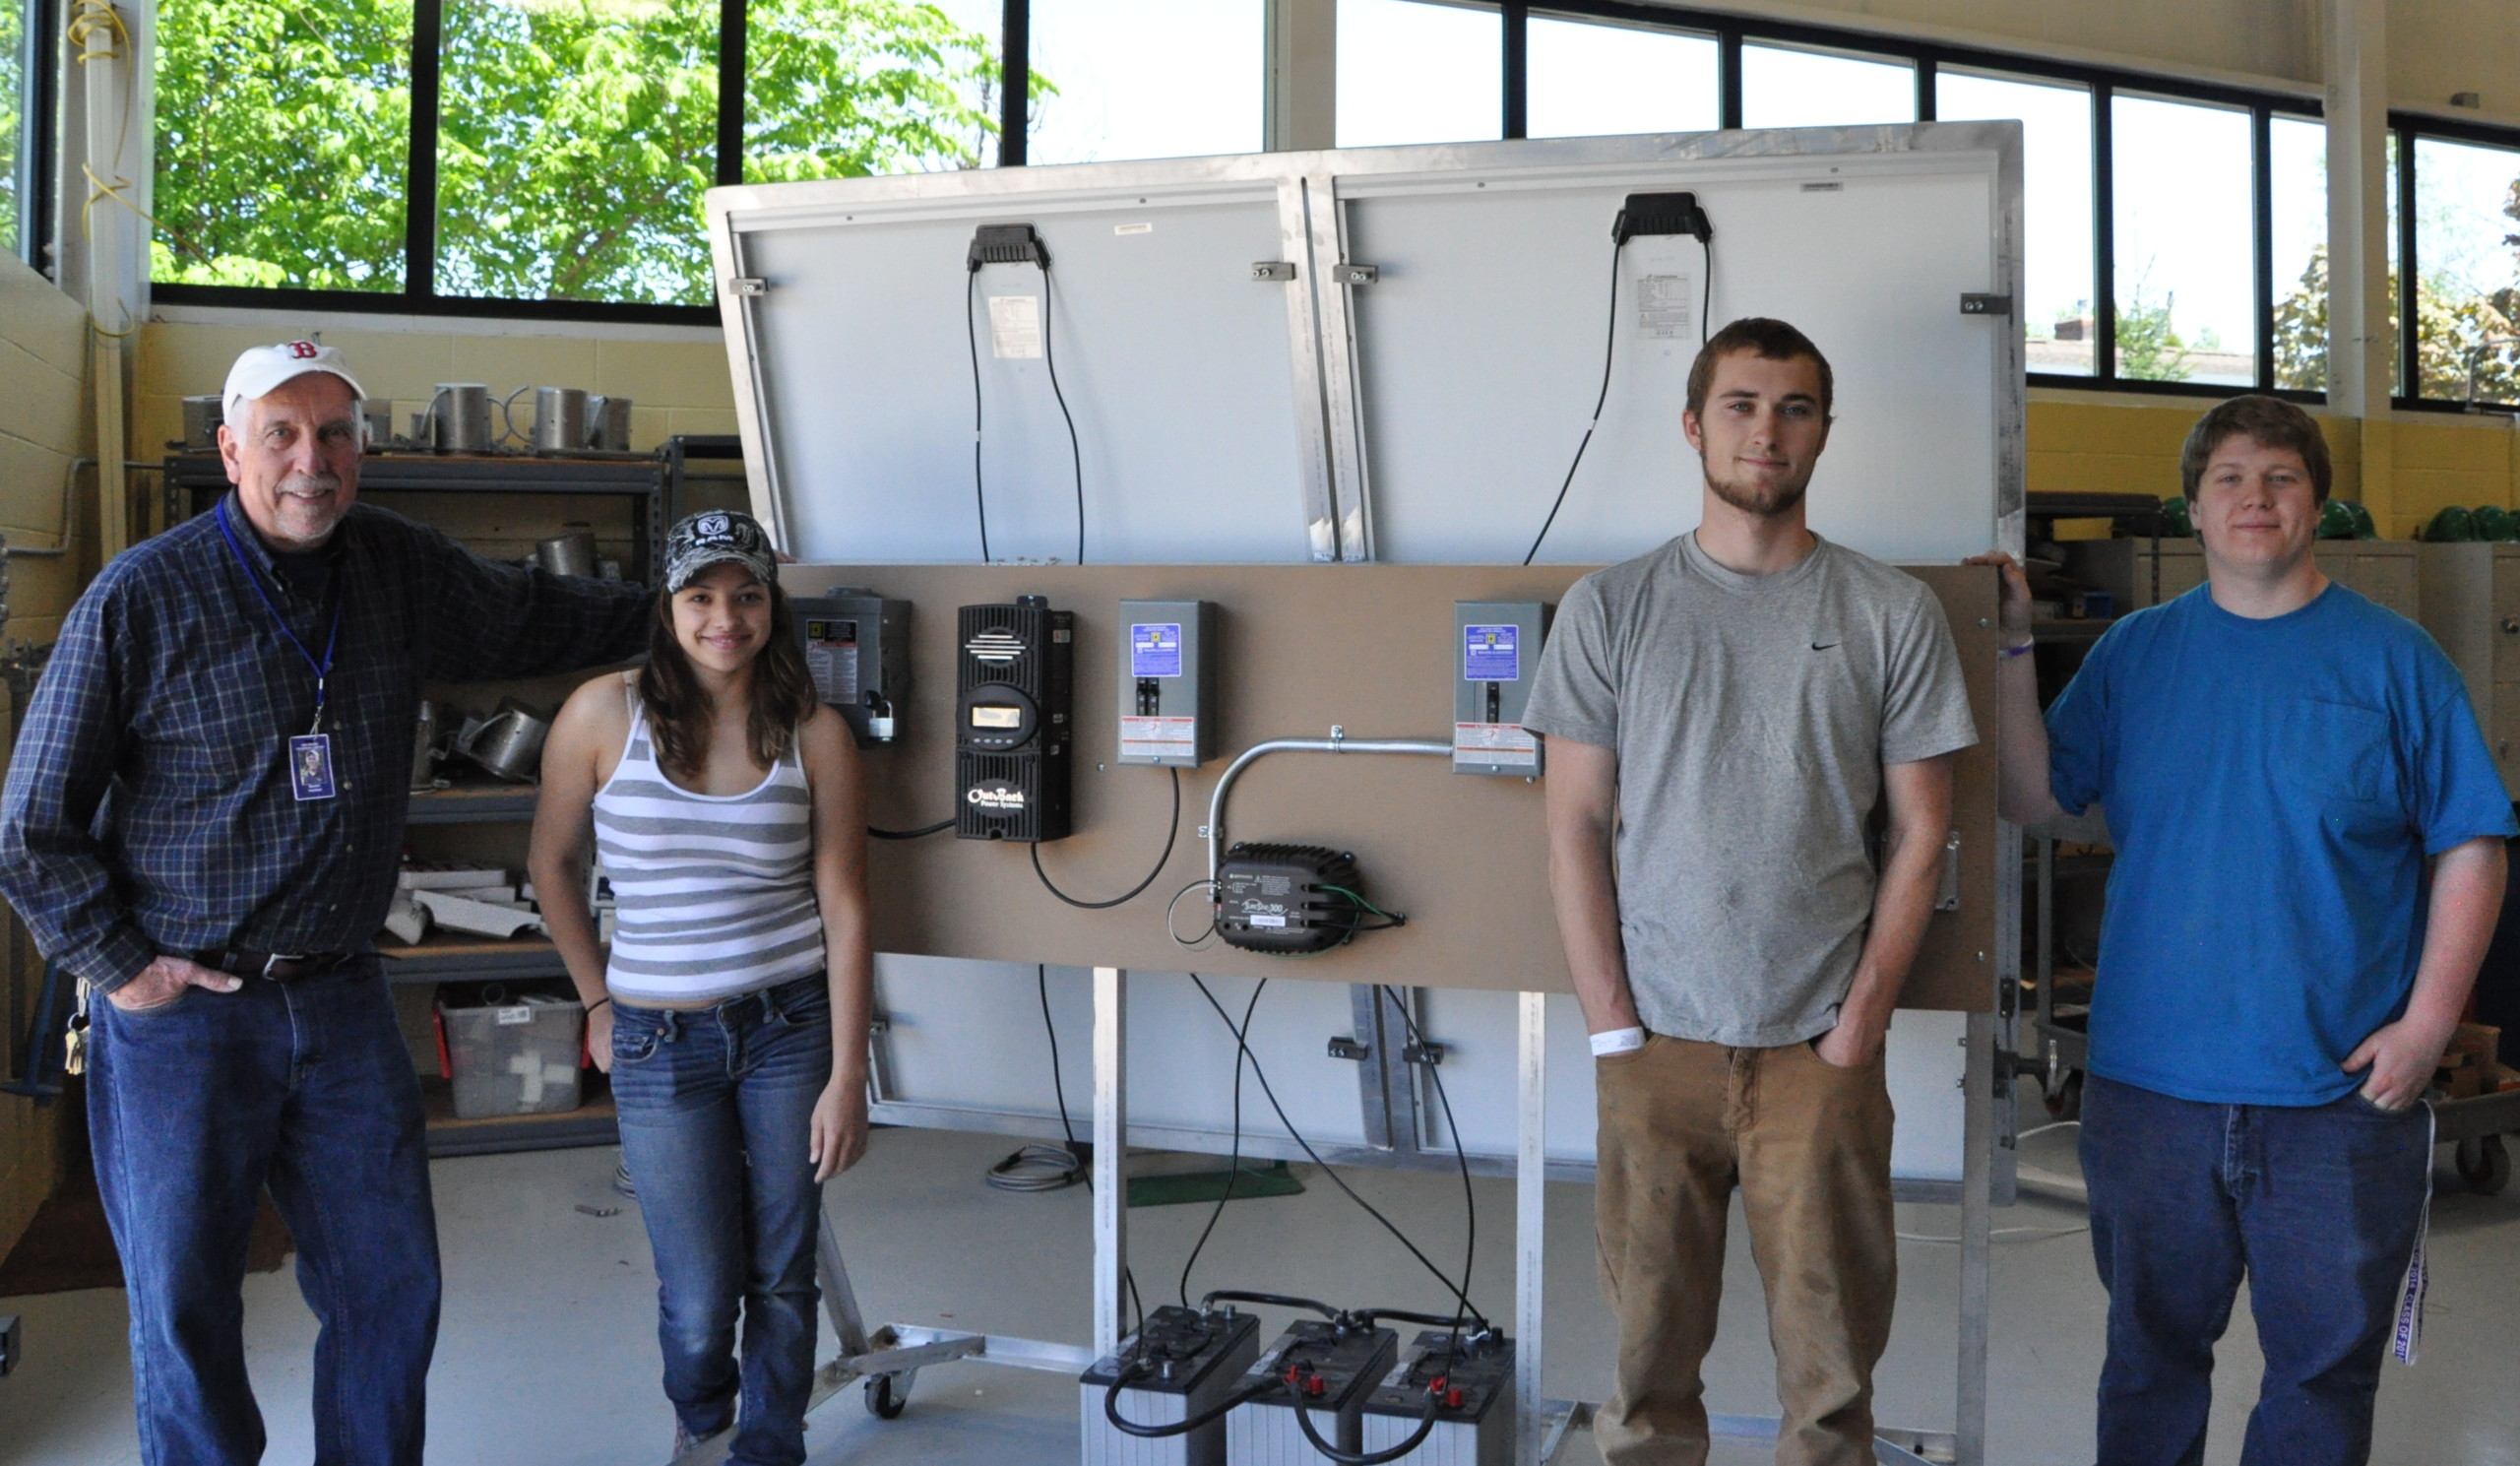 Keven Vachon and MMTC electrical students with the solar training unit they built